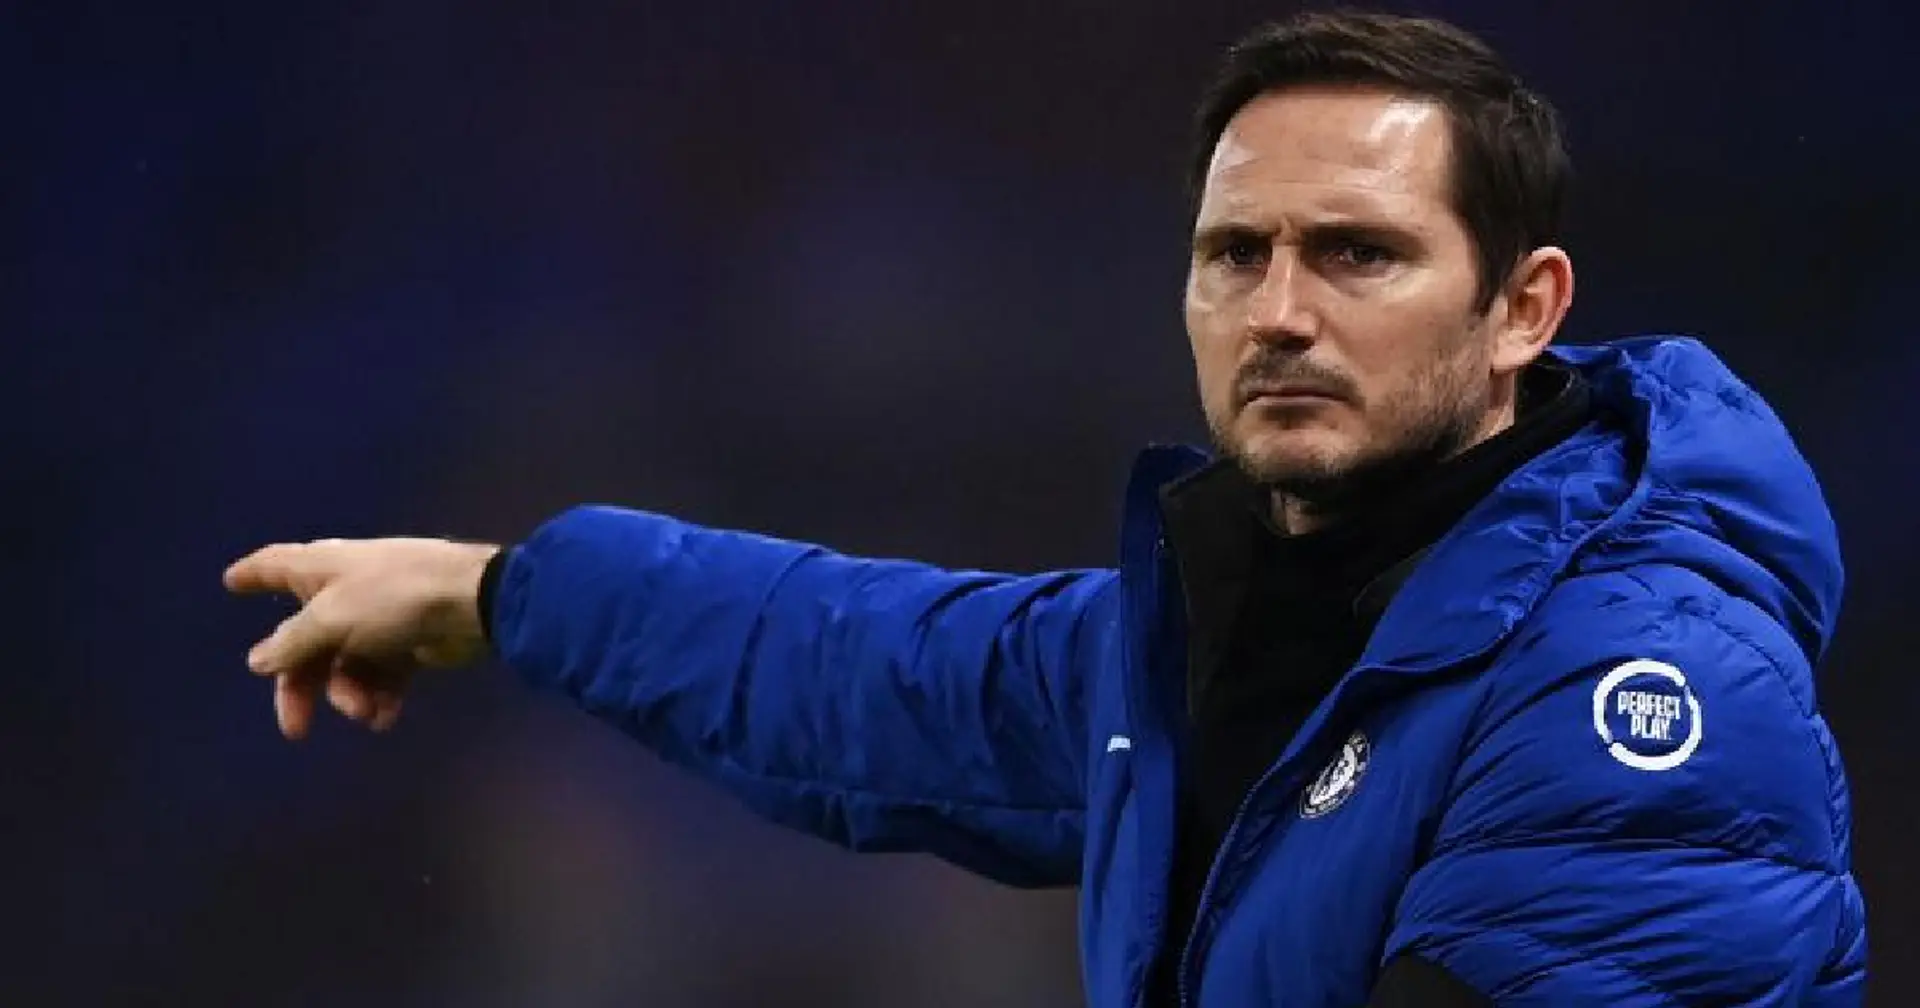 'No Chelsea fan hates him': Global CFC community's reactions to Lampard after Leicester loss